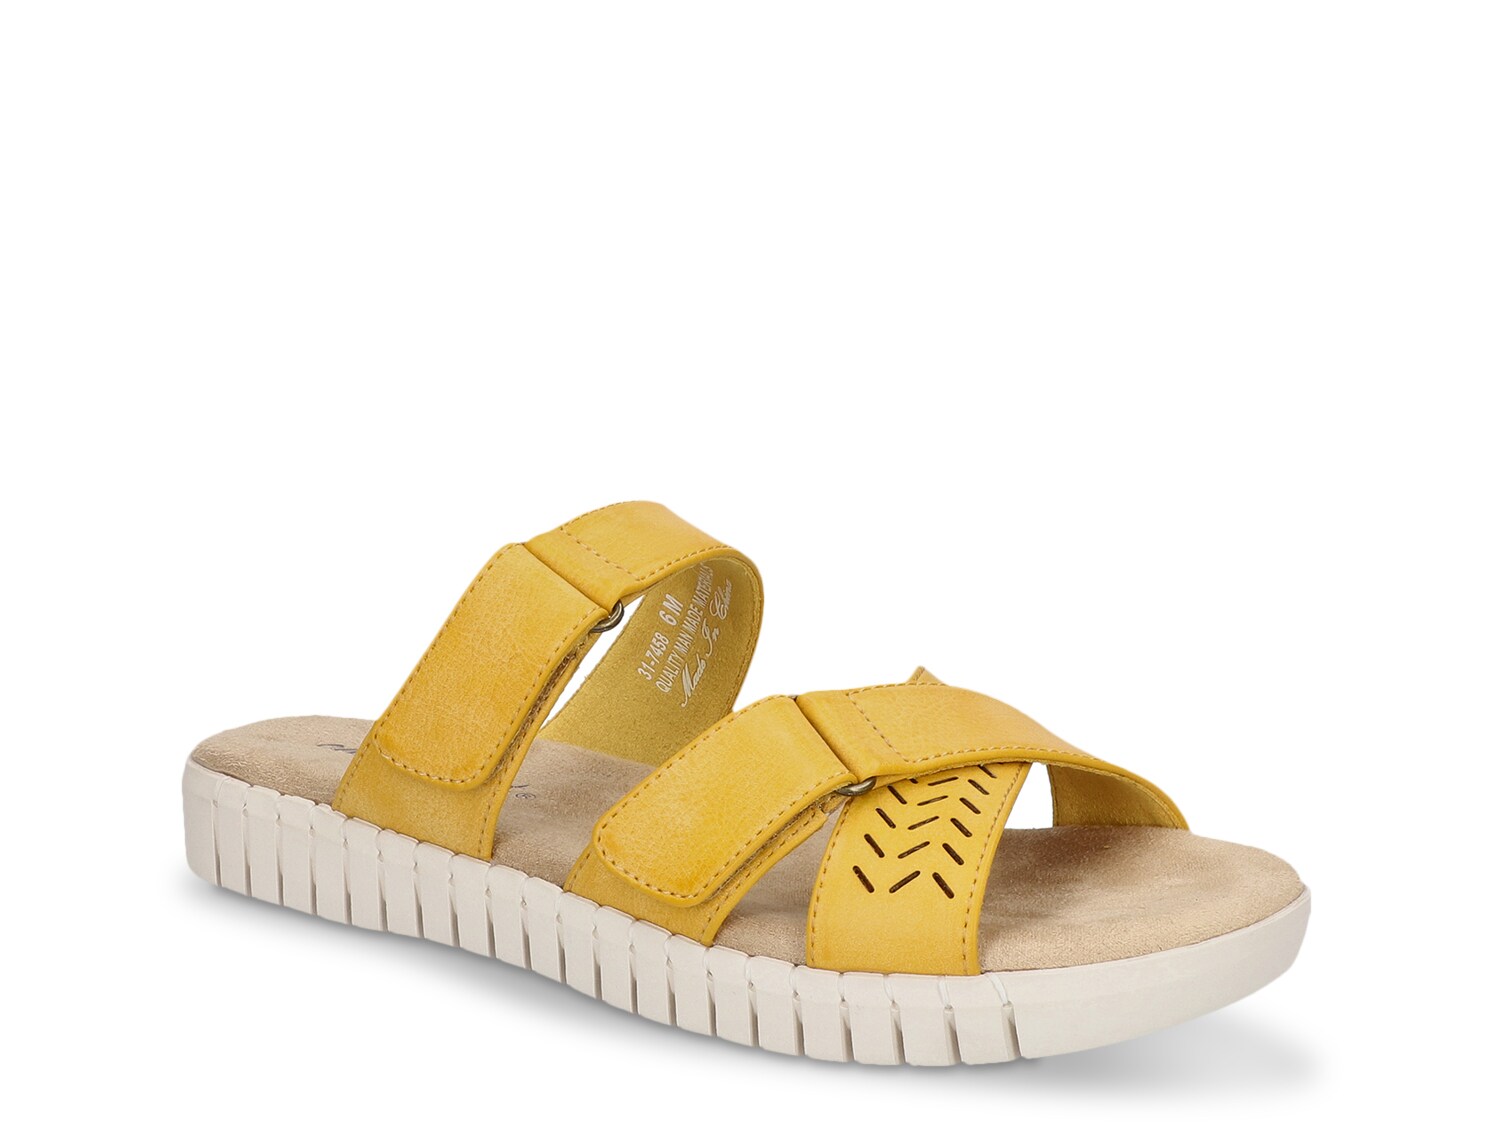 Easy Street Patricia Sandal - Free Shipping | DSW